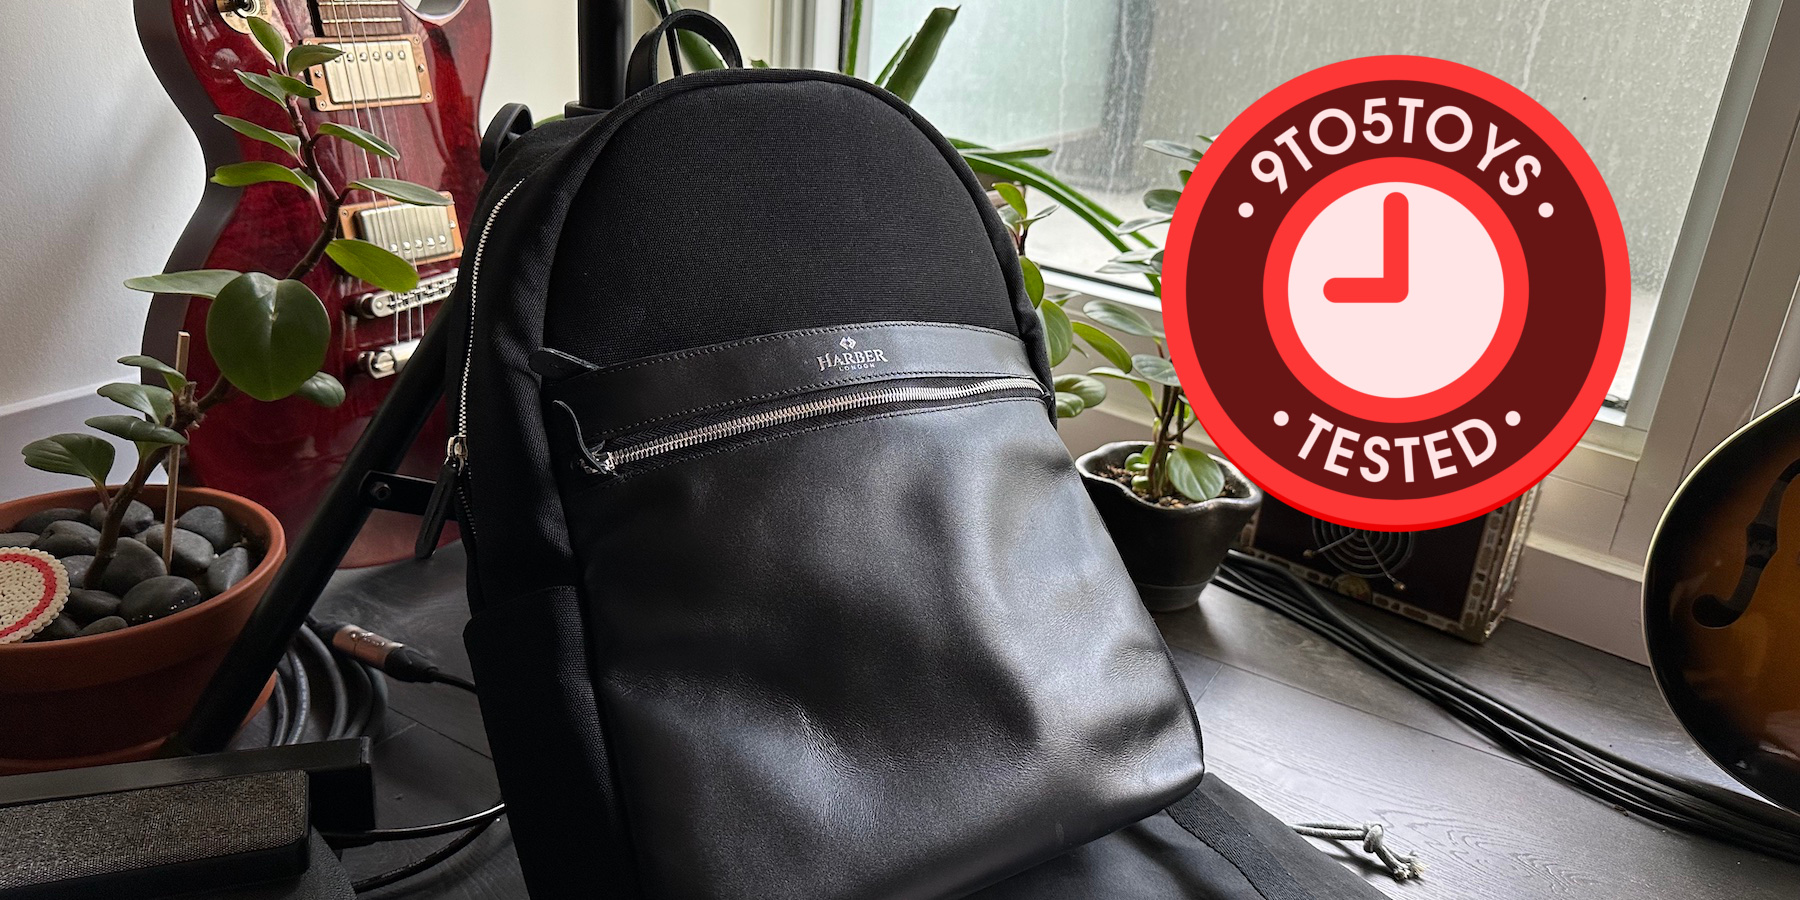 This previously owned high end designer backpack is a must have